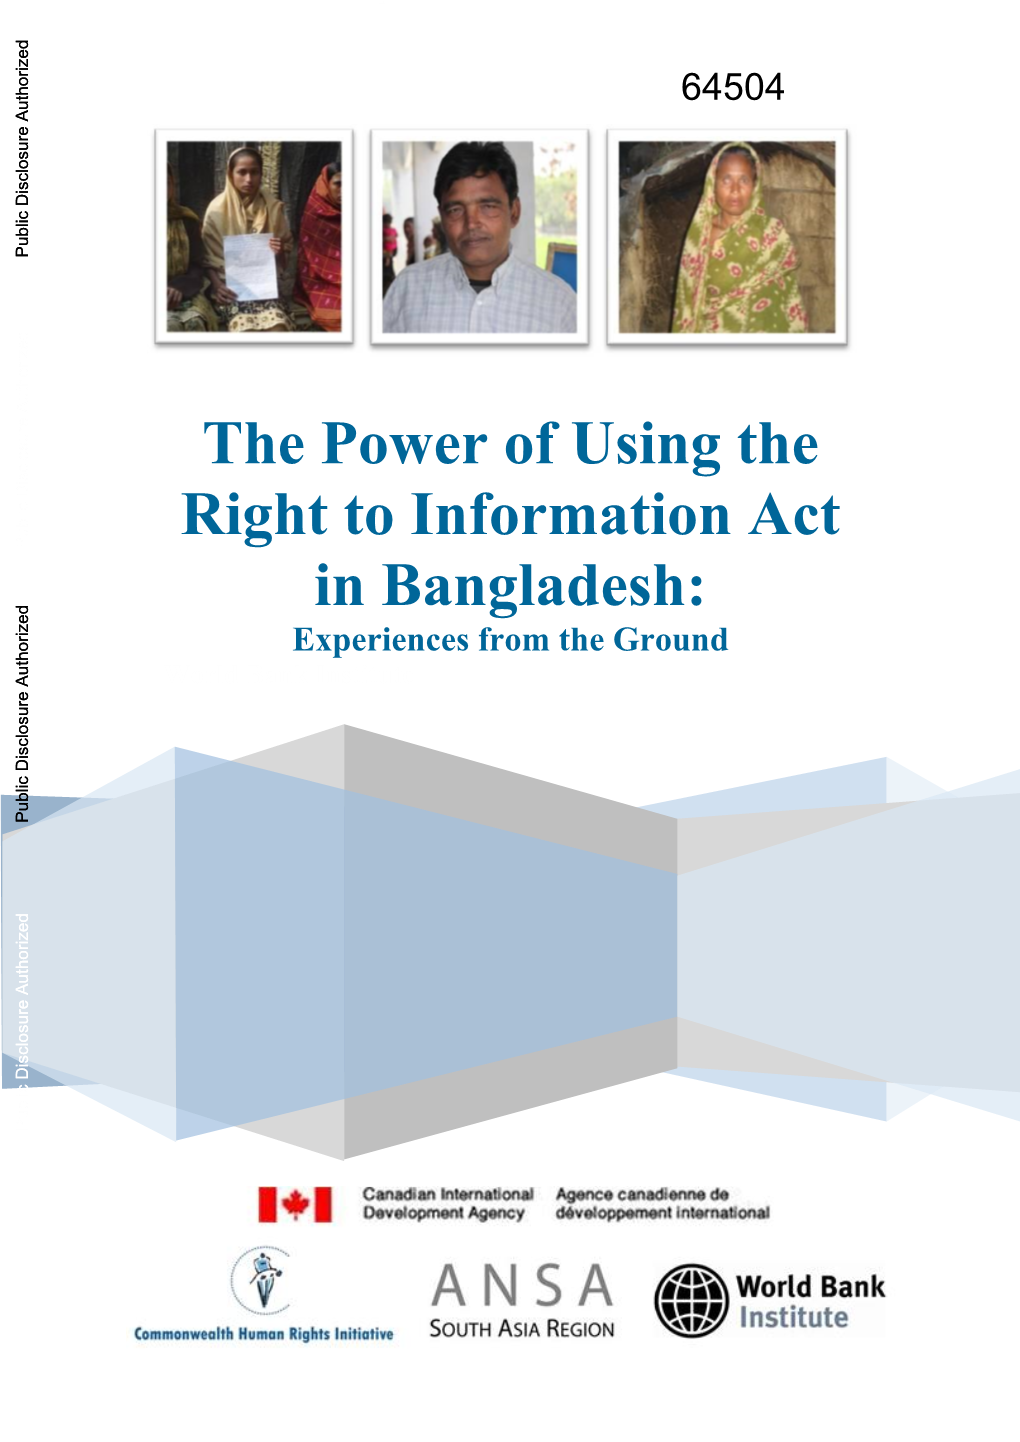 The Power of Using the Right to Information Act in Bangladesh